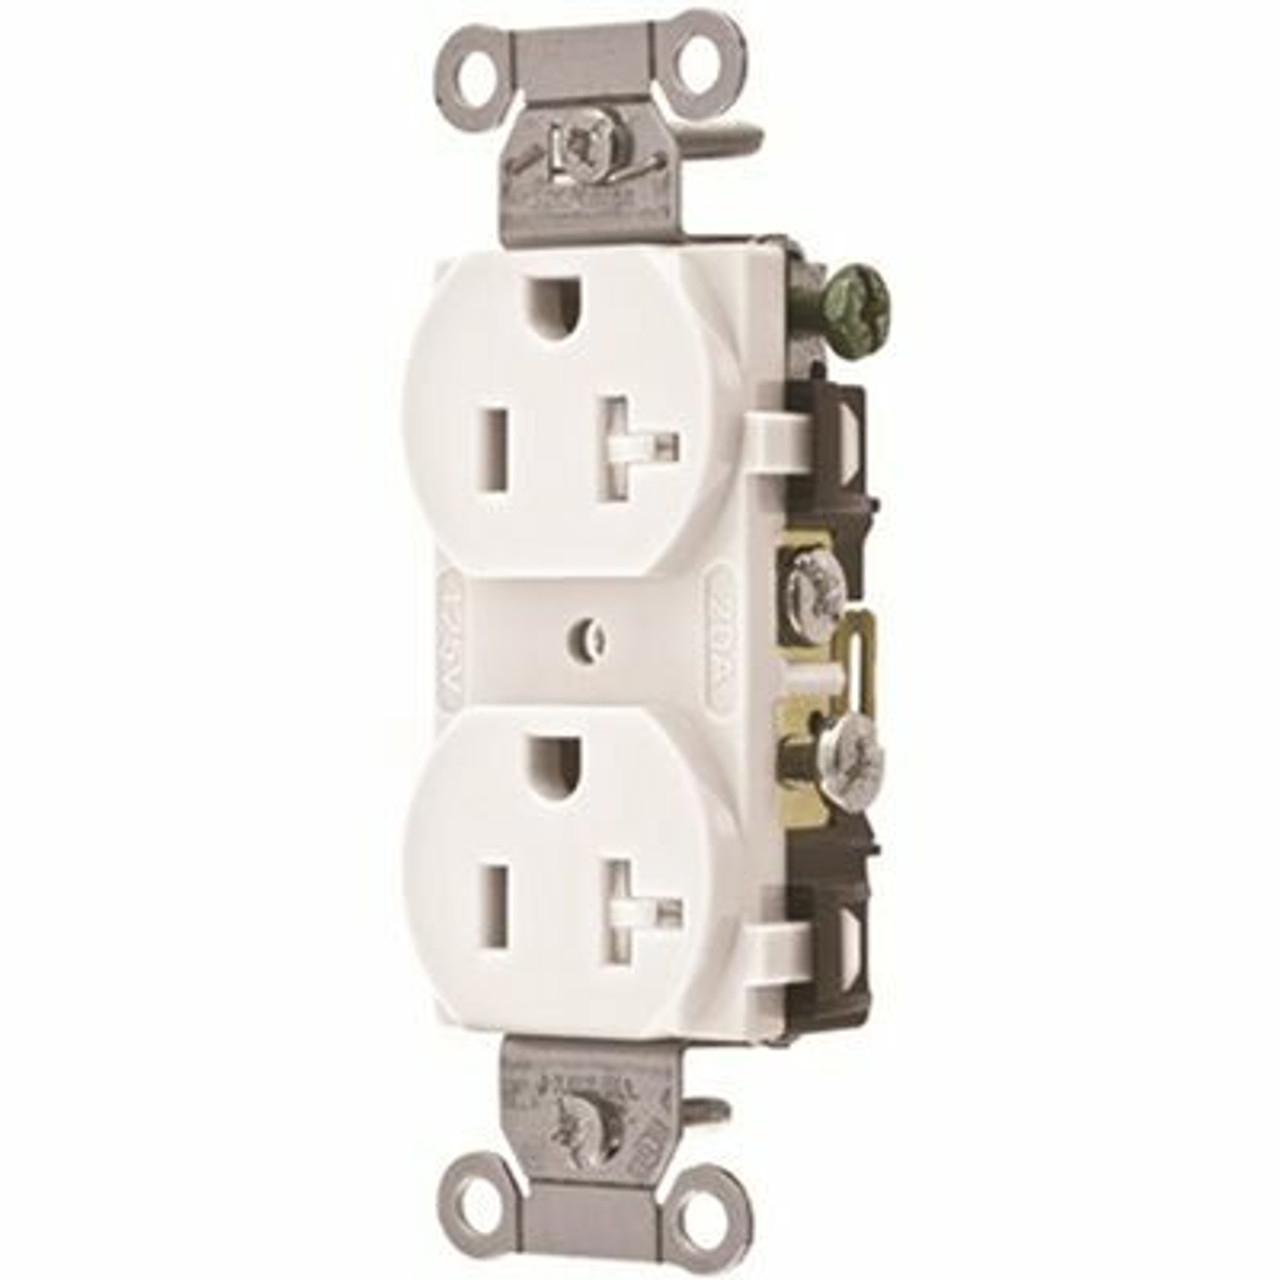 Hubbell Wiring 20 Amp Hubbell Commercial Grade Tamper Resistant Duplex Receptacle, White